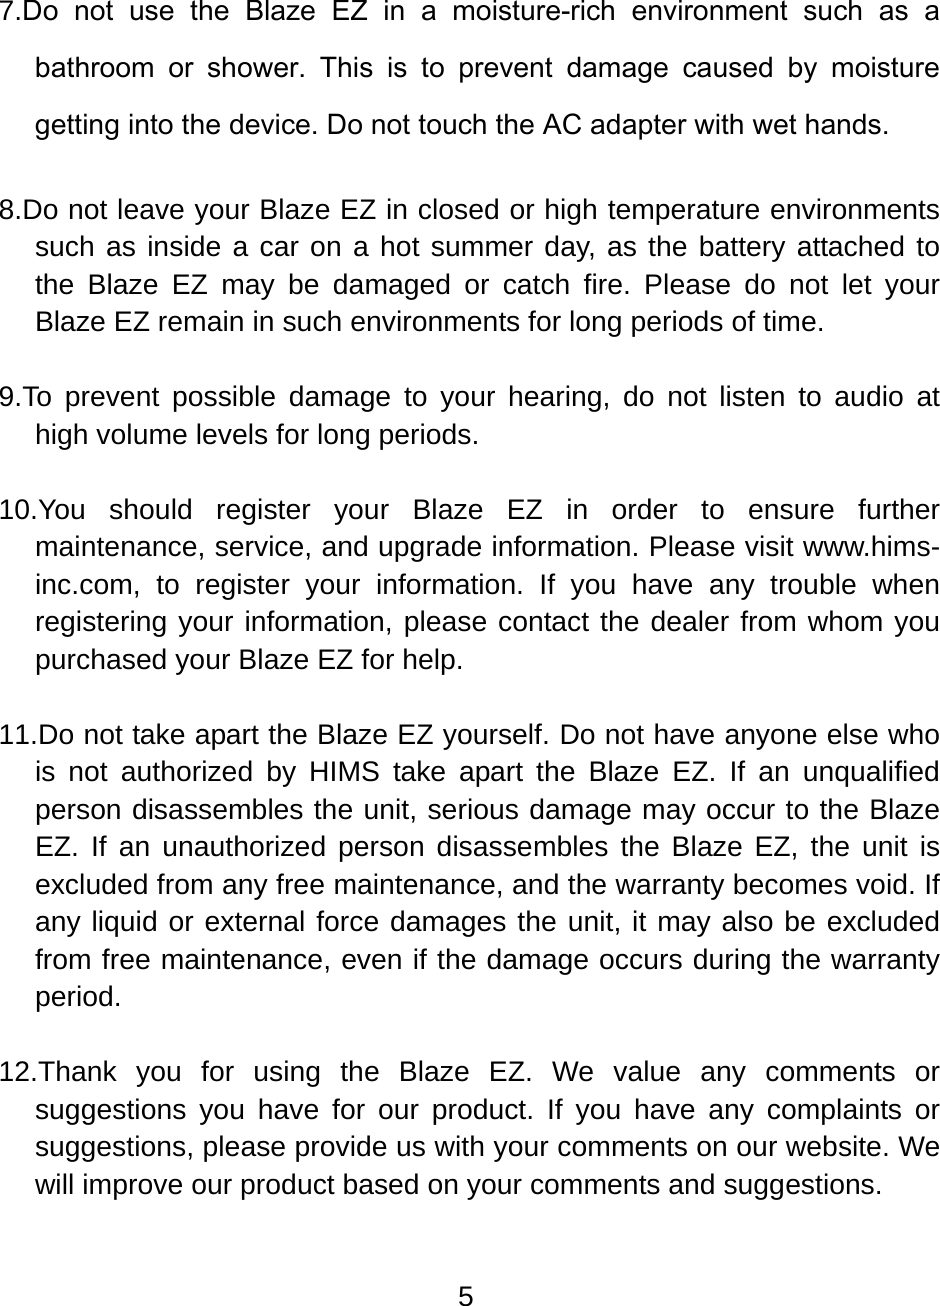 5  7.Do  not  use  the  Blaze  EZ  in  a  moisture-rich  environment  such  as  a bathroom  or  shower.  This  is  to  prevent  damage  caused  by  moisture getting into the device. Do not touch the AC adapter with wet hands.  8.Do not leave your Blaze EZ in closed or high temperature environments such as inside a car on a hot summer day, as the battery attached to the Blaze EZ may be damaged or catch fire. Please do not let your Blaze EZ remain in such environments for long periods of time.  9.To prevent possible damage to your hearing, do not listen to audio at high volume levels for long periods.  10.You should register your Blaze EZ in order to ensure further maintenance, service, and upgrade information. Please visit www.hims-inc.com, to register your information. If you have any trouble when registering your information, please contact the dealer from whom you purchased your Blaze EZ for help.  11.Do not take apart the Blaze EZ yourself. Do not have anyone else who is not authorized by HIMS take apart the Blaze EZ. If an unqualified person disassembles the unit, serious damage may occur to the Blaze EZ. If an unauthorized person disassembles the Blaze EZ, the unit is excluded from any free maintenance, and the warranty becomes void. If any liquid or external force damages the unit, it may also be excluded from free maintenance, even if the damage occurs during the warranty period.  12.Thank you for using the Blaze EZ. We value any comments or suggestions you have for our product. If you have any complaints or suggestions, please provide us with your comments on our website. We will improve our product based on your comments and suggestions.  